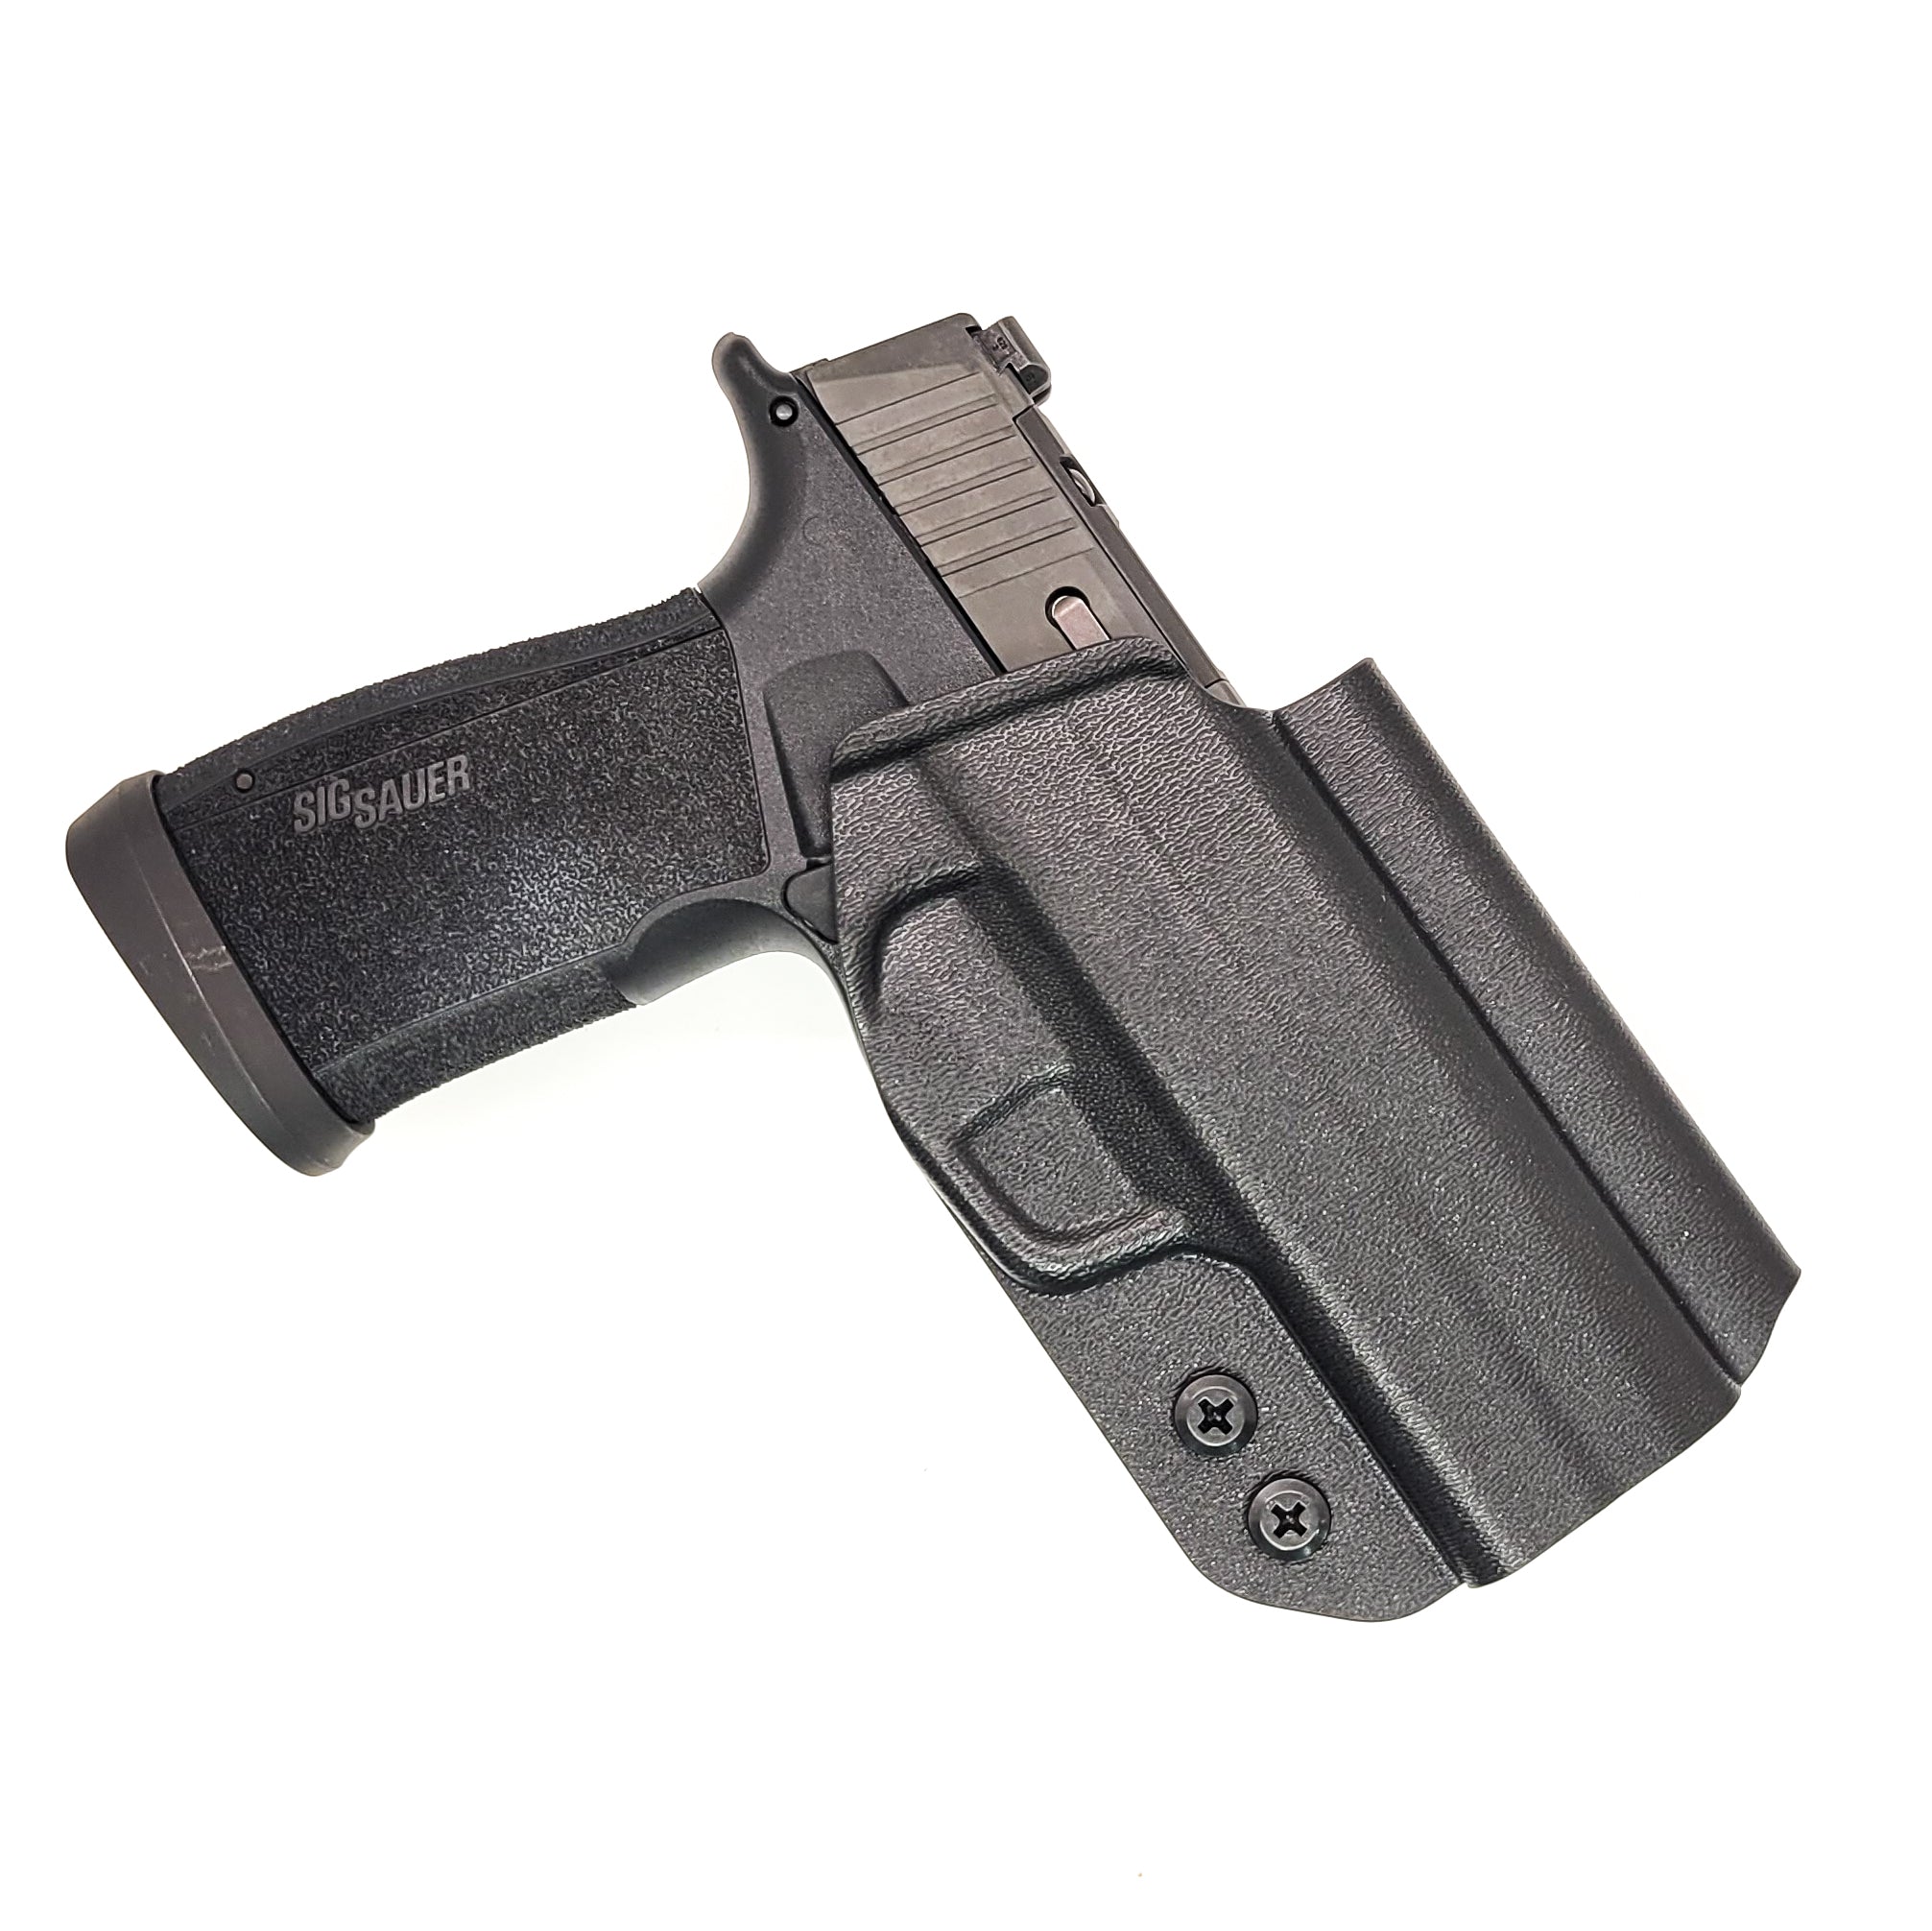 For the best, Outside Waistband OWB Kydex Holster designed to fit the Sig Sauer P365-XMACRO TACOPS, P365-XMACRO COMP, P365-XMACRO, and P365-XMACRO COMP ROMEOZERO ELITE handgun, shop Four Brothers Holsters. Made in USA. Full sweat guard, adjustable retention. Open muzzle for threaded barrels, cleared for red dot sights